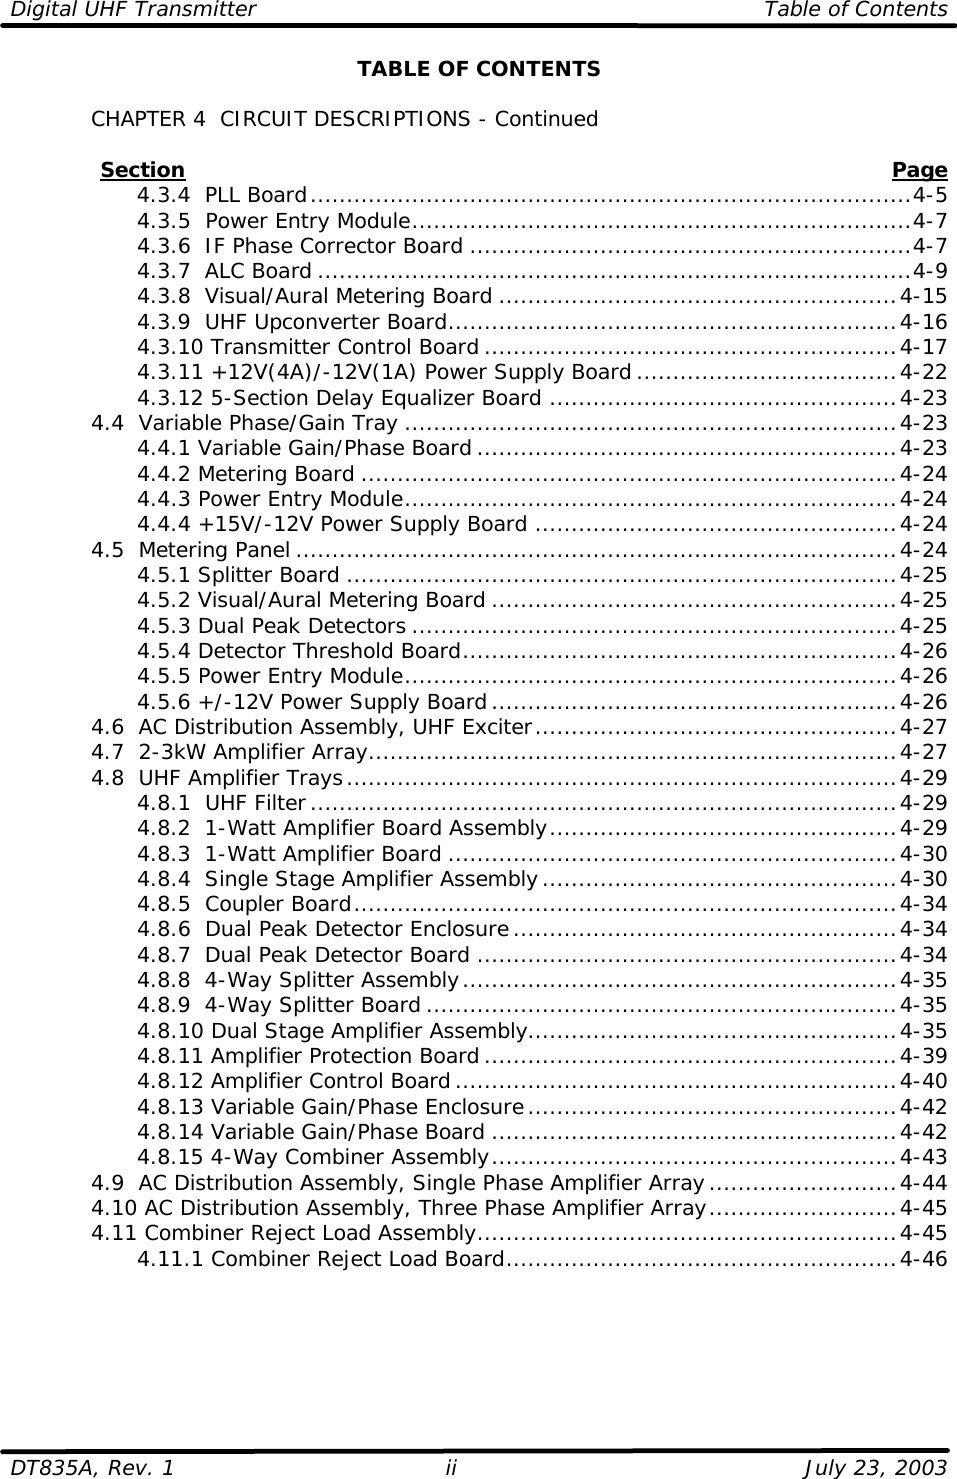 Digital UHF Transmitter Table of Contents  DT835A, Rev. 1 ii July 23, 2003 TABLE OF CONTENTS   CHAPTER 4  CIRCUIT DESCRIPTIONS - Continued               Section Page     4.3.4  PLL Board...................................................................................4-5     4.3.5  Power Entry Module.....................................................................4-7     4.3.6  IF Phase Corrector Board .............................................................4-7     4.3.7  ALC Board ..................................................................................4-9     4.3.8  Visual/Aural Metering Board .......................................................4-15     4.3.9  UHF Upconverter Board..............................................................4-16     4.3.10 Transmitter Control Board .........................................................4-17     4.3.11 +12V(4A)/-12V(1A) Power Supply Board....................................4-22     4.3.12 5-Section Delay Equalizer Board ................................................4-23  4.4  Variable Phase/Gain Tray ....................................................................4-23     4.4.1 Variable Gain/Phase Board ..........................................................4-23     4.4.2 Metering Board ..........................................................................4-24     4.4.3 Power Entry Module....................................................................4-24     4.4.4 +15V/-12V Power Supply Board ..................................................4-24  4.5  Metering Panel ...................................................................................4-24     4.5.1 Splitter Board ............................................................................4-25     4.5.2 Visual/Aural Metering Board ........................................................4-25     4.5.3 Dual Peak Detectors ...................................................................4-25     4.5.4 Detector Threshold Board............................................................4-26     4.5.5 Power Entry Module....................................................................4-26     4.5.6 +/-12V Power Supply Board........................................................4-26  4.6  AC Distribution Assembly, UHF Exciter..................................................4-27  4.7  2-3kW Amplifier Array.........................................................................4-27  4.8  UHF Amplifier Trays............................................................................4-29     4.8.1  UHF Filter.................................................................................4-29     4.8.2  1-Watt Amplifier Board Assembly................................................4-29     4.8.3  1-Watt Amplifier Board ..............................................................4-30     4.8.4  Single Stage Amplifier Assembly.................................................4-30     4.8.5  Coupler Board...........................................................................4-34     4.8.6  Dual Peak Detector Enclosure.....................................................4-34     4.8.7  Dual Peak Detector Board ..........................................................4-34     4.8.8  4-Way Splitter Assembly............................................................4-35     4.8.9  4-Way Splitter Board .................................................................4-35     4.8.10 Dual Stage Amplifier Assembly...................................................4-35     4.8.11 Amplifier Protection Board .........................................................4-39     4.8.12 Amplifier Control Board.............................................................4-40     4.8.13 Variable Gain/Phase Enclosure...................................................4-42     4.8.14 Variable Gain/Phase Board ........................................................4-42     4.8.15 4-Way Combiner Assembly........................................................4-43  4.9  AC Distribution Assembly, Single Phase Amplifier Array..........................4-44  4.10 AC Distribution Assembly, Three Phase Amplifier Array..........................4-45 4.11 Combiner Reject Load Assembly..........................................................4-45     4.11.1 Combiner Reject Load Board......................................................4-46  